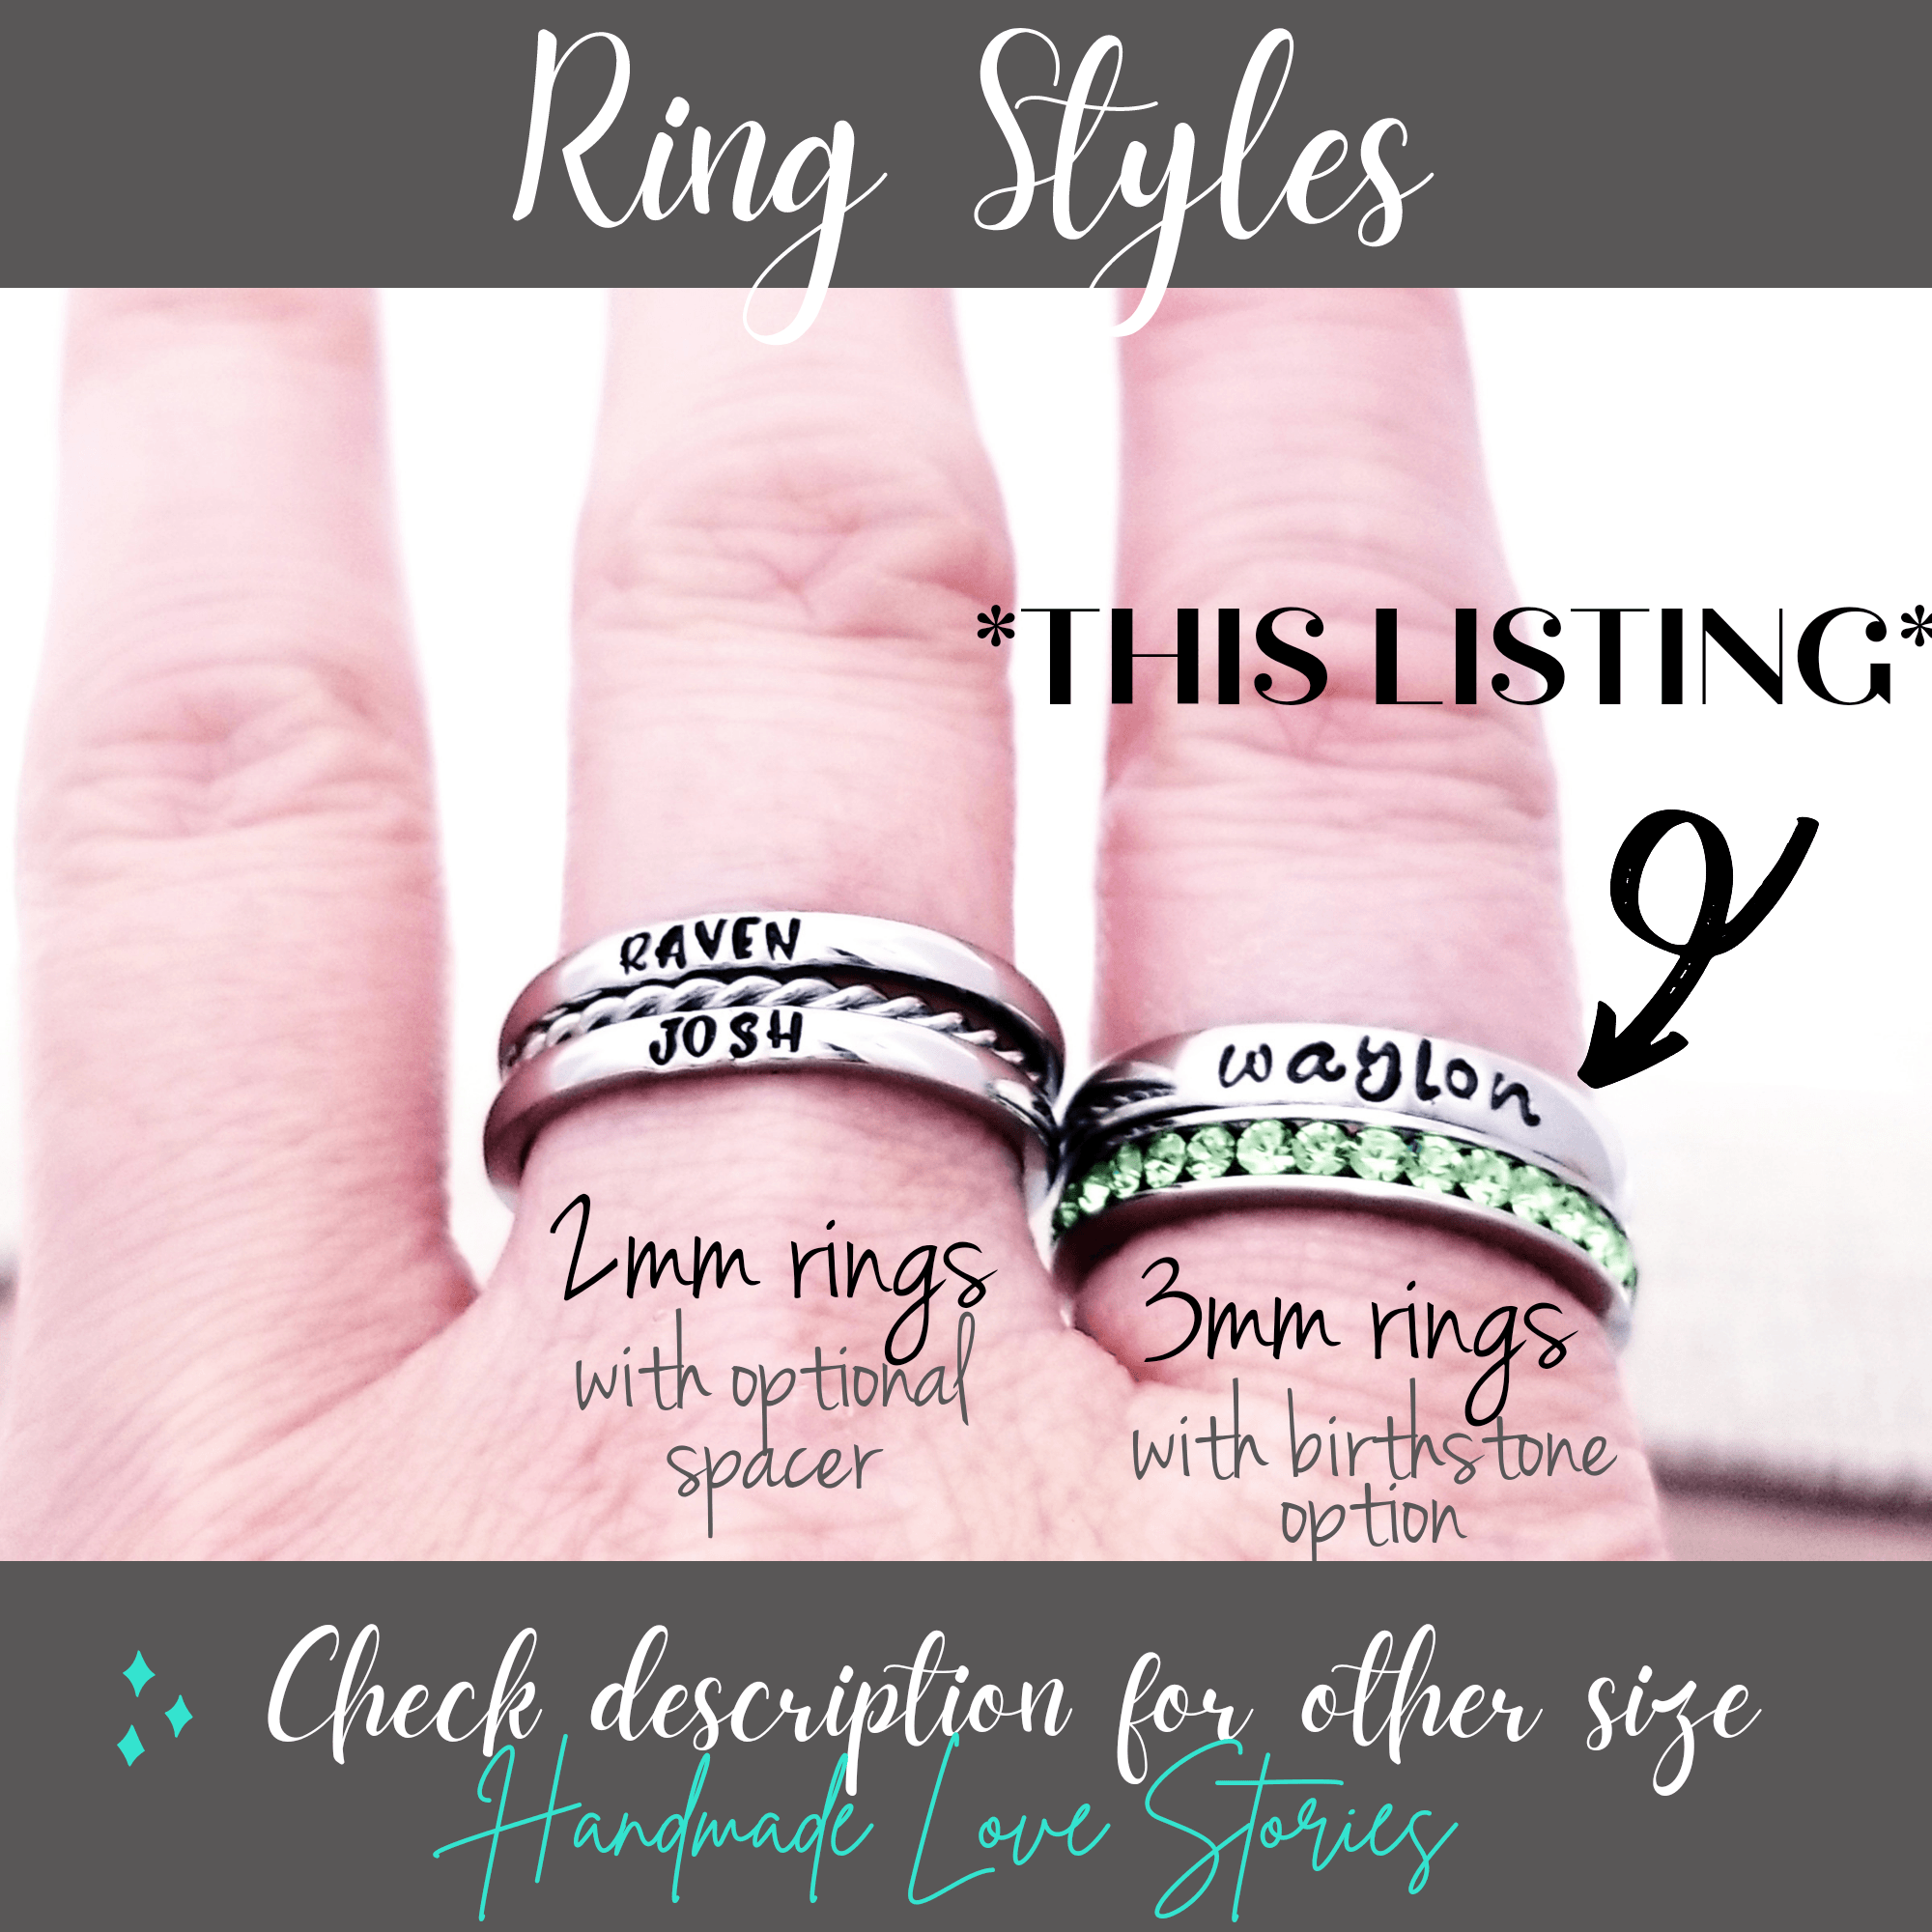 Statement Ring, Feminist Ring, Feminist Jewelry, Stacking Ring, Personalize Jewelry, Hand Stamped Ring, Silver Personalize Ring, Stackable